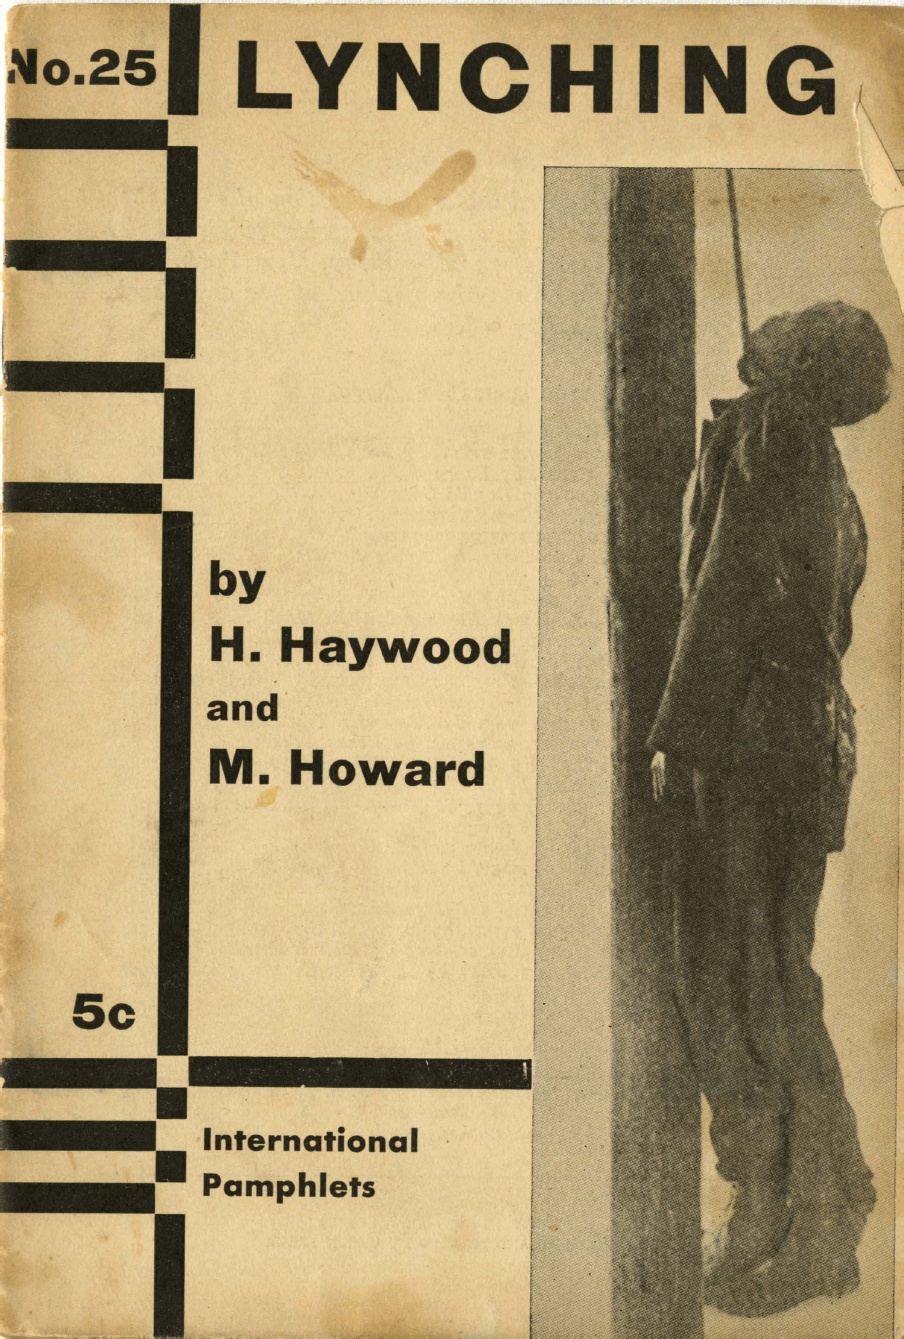 The front cover of Haywood and Howard's pamphlet. The original publishers did not credit the photograph on the cover. Though we can't positively identify the man in the photograph, the picture is nearly identical to one featured on a 1908 postcard of an unidentified lynching victim in Oxford, Georgia and included in the collection, Without Sanctuary: Lynching Photography in America.